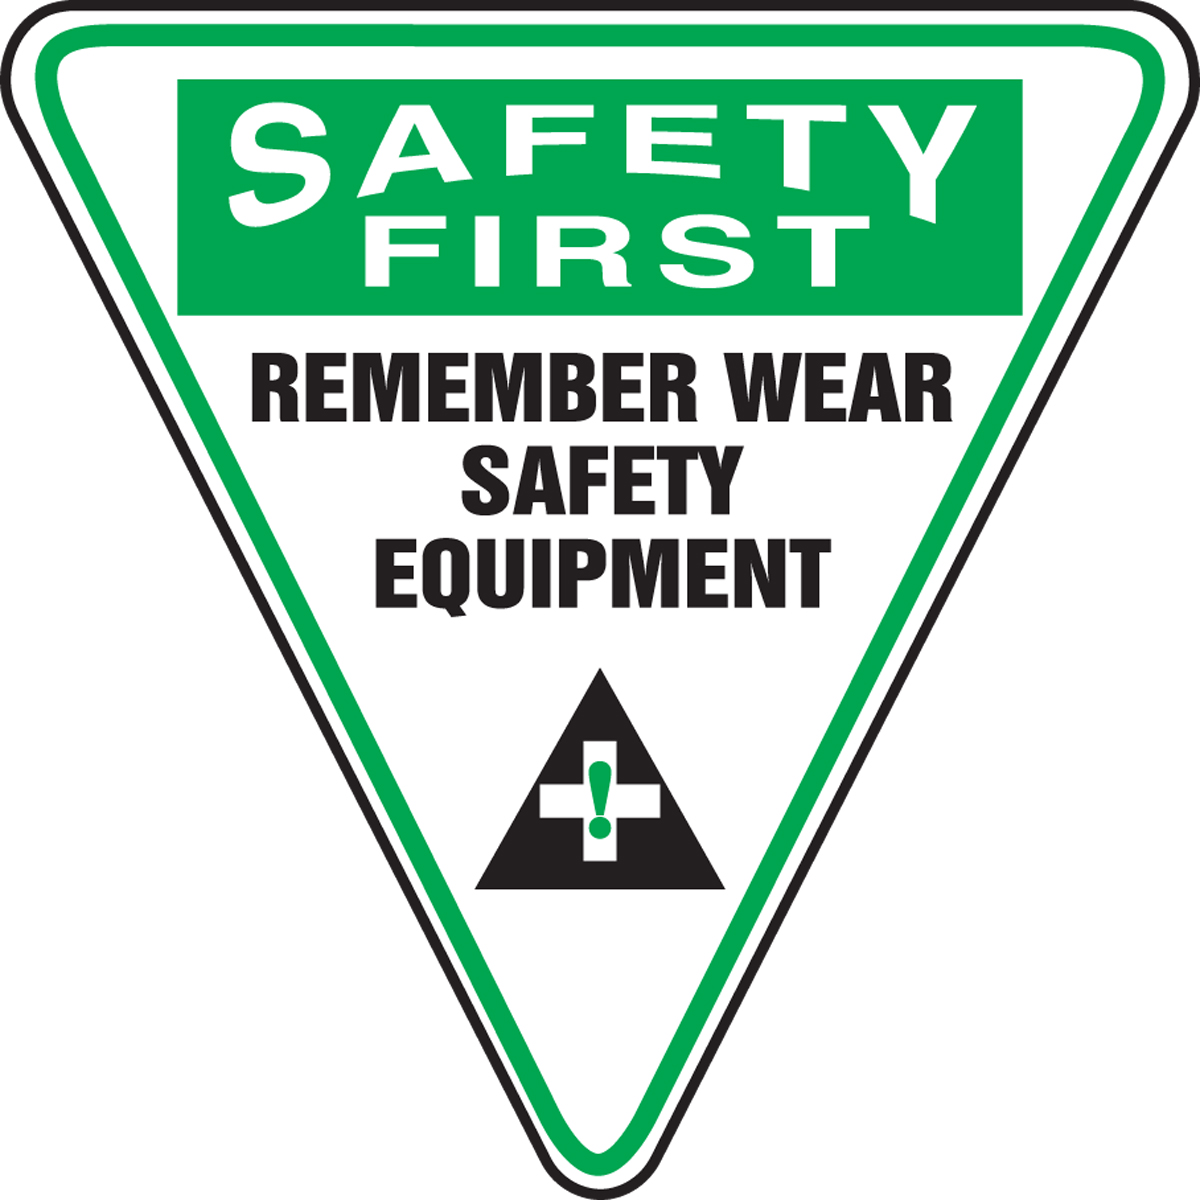 SAFETY FIRST REMEMBER WEAR SAFETY EQUIPMENT (W/GRAPHIC)